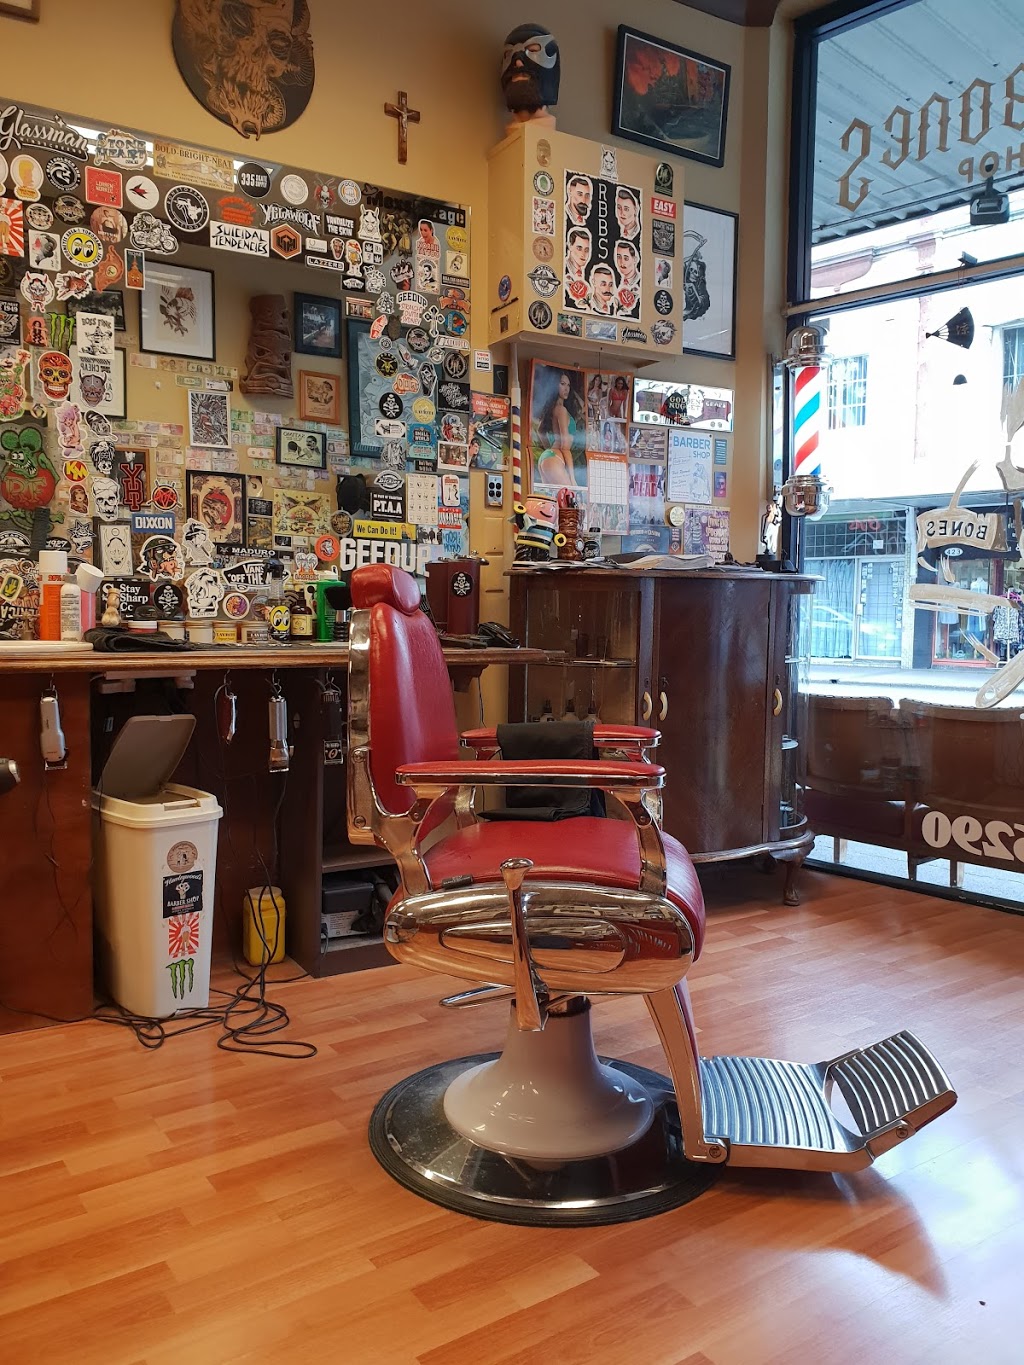 Hawleywoods Barber Shop | hair care | 432 King St, Newtown NSW 2042, Australia | 0295576290 OR +61 2 9557 6290